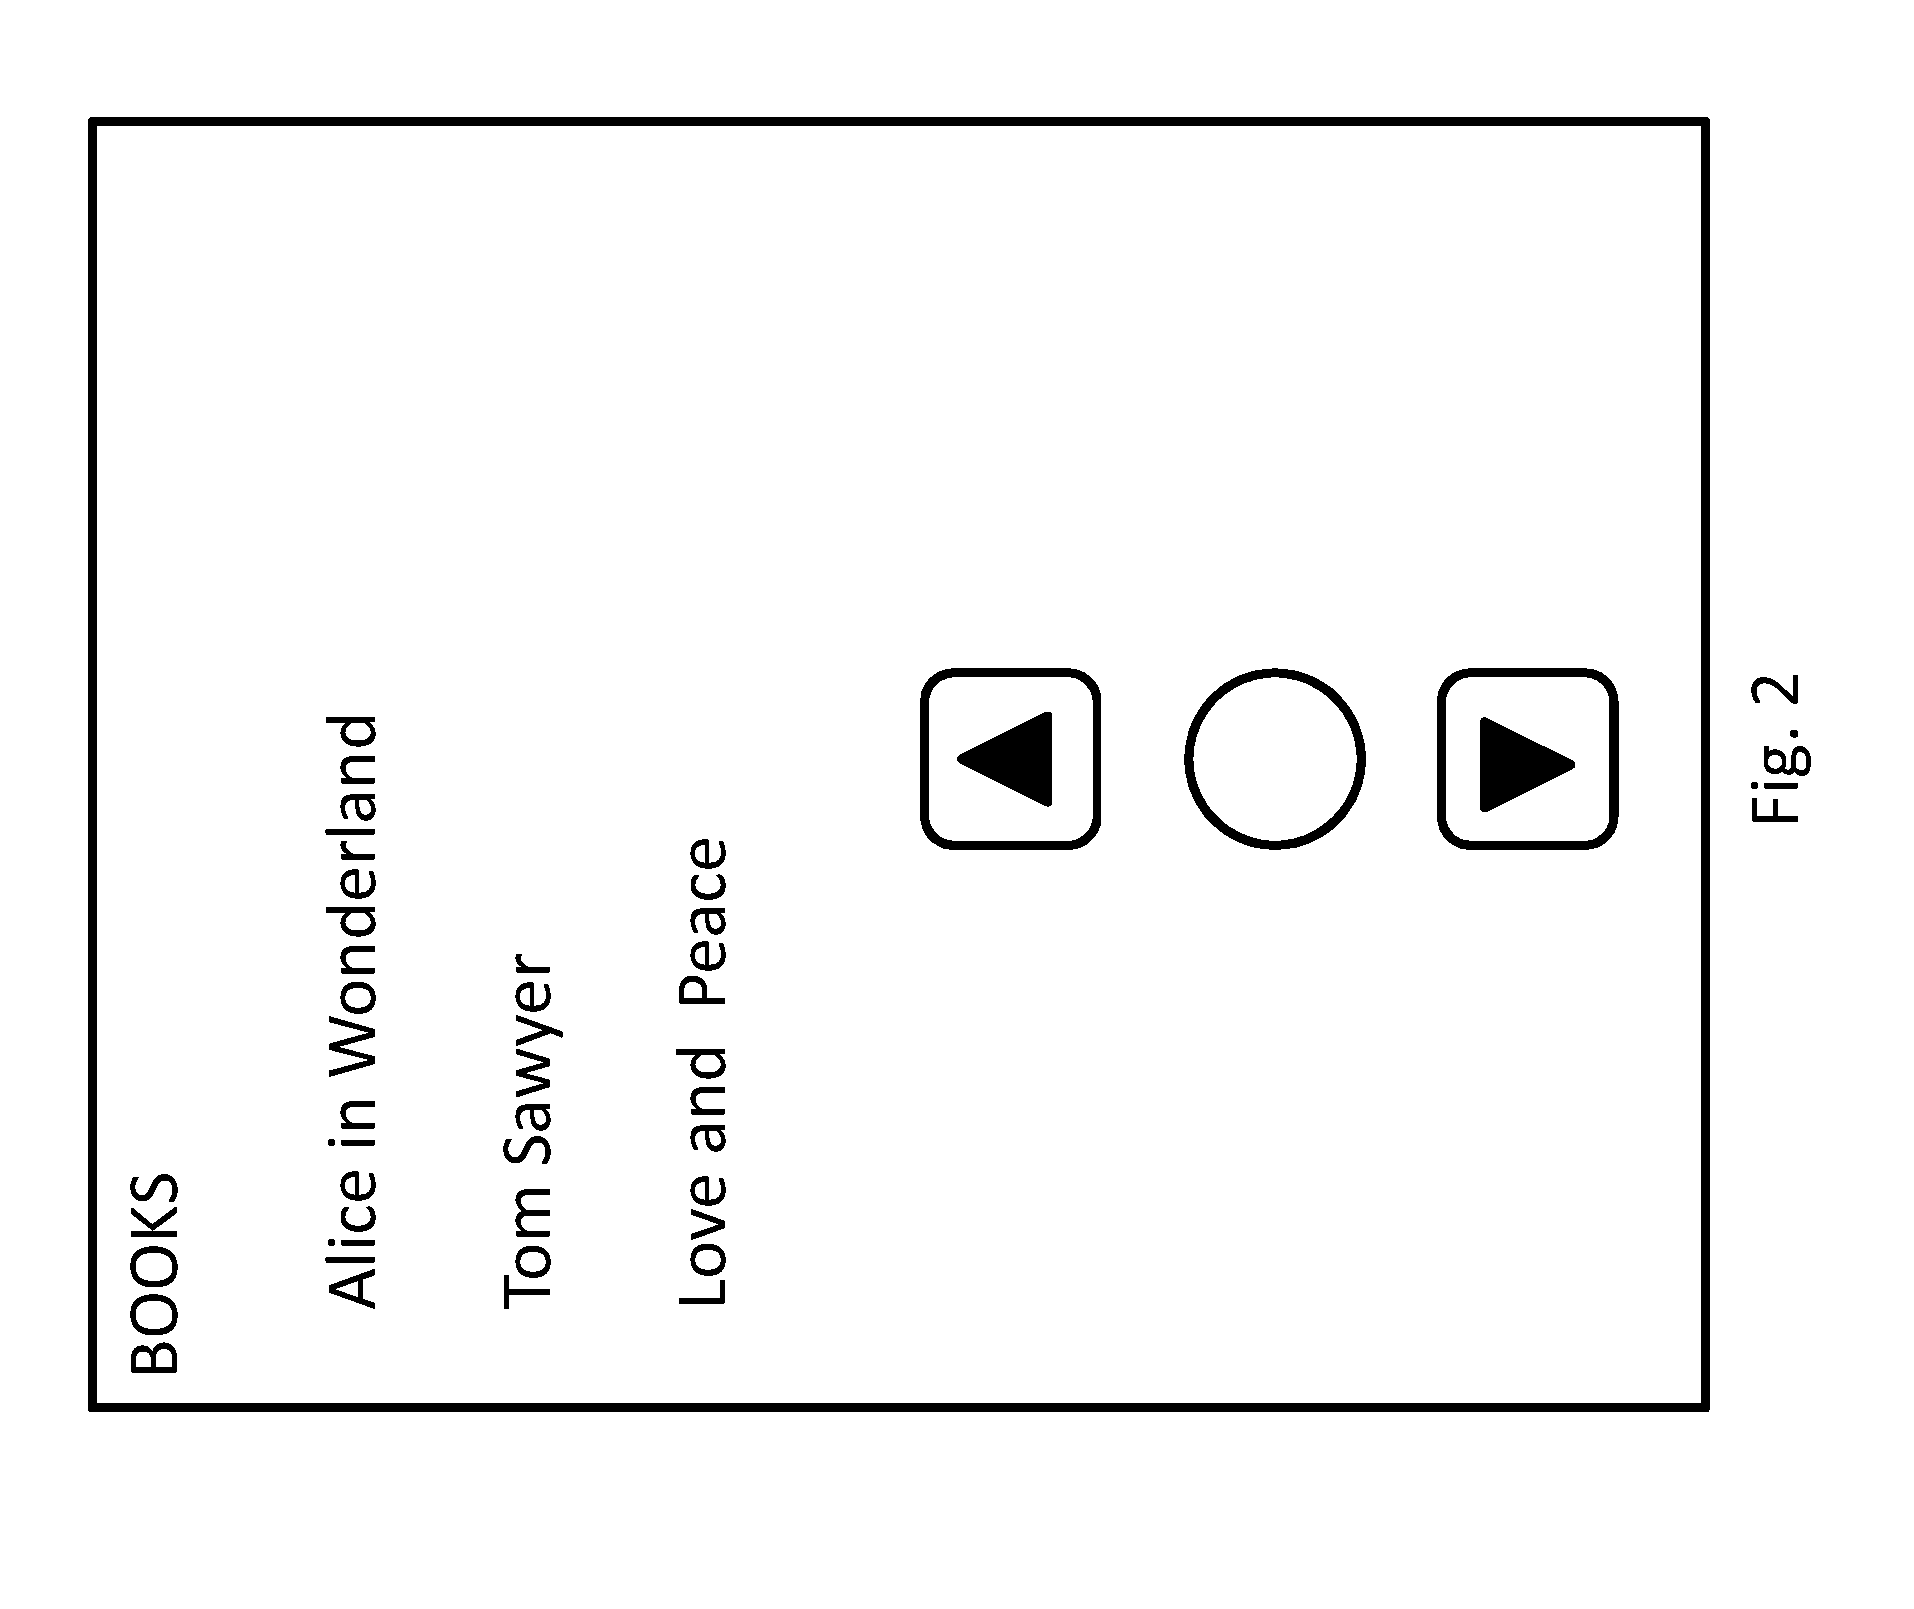 Interface layer and operating system facilitating use, including by blind and visually-impaired users, of touch-screen-controlled consumer electronic devices